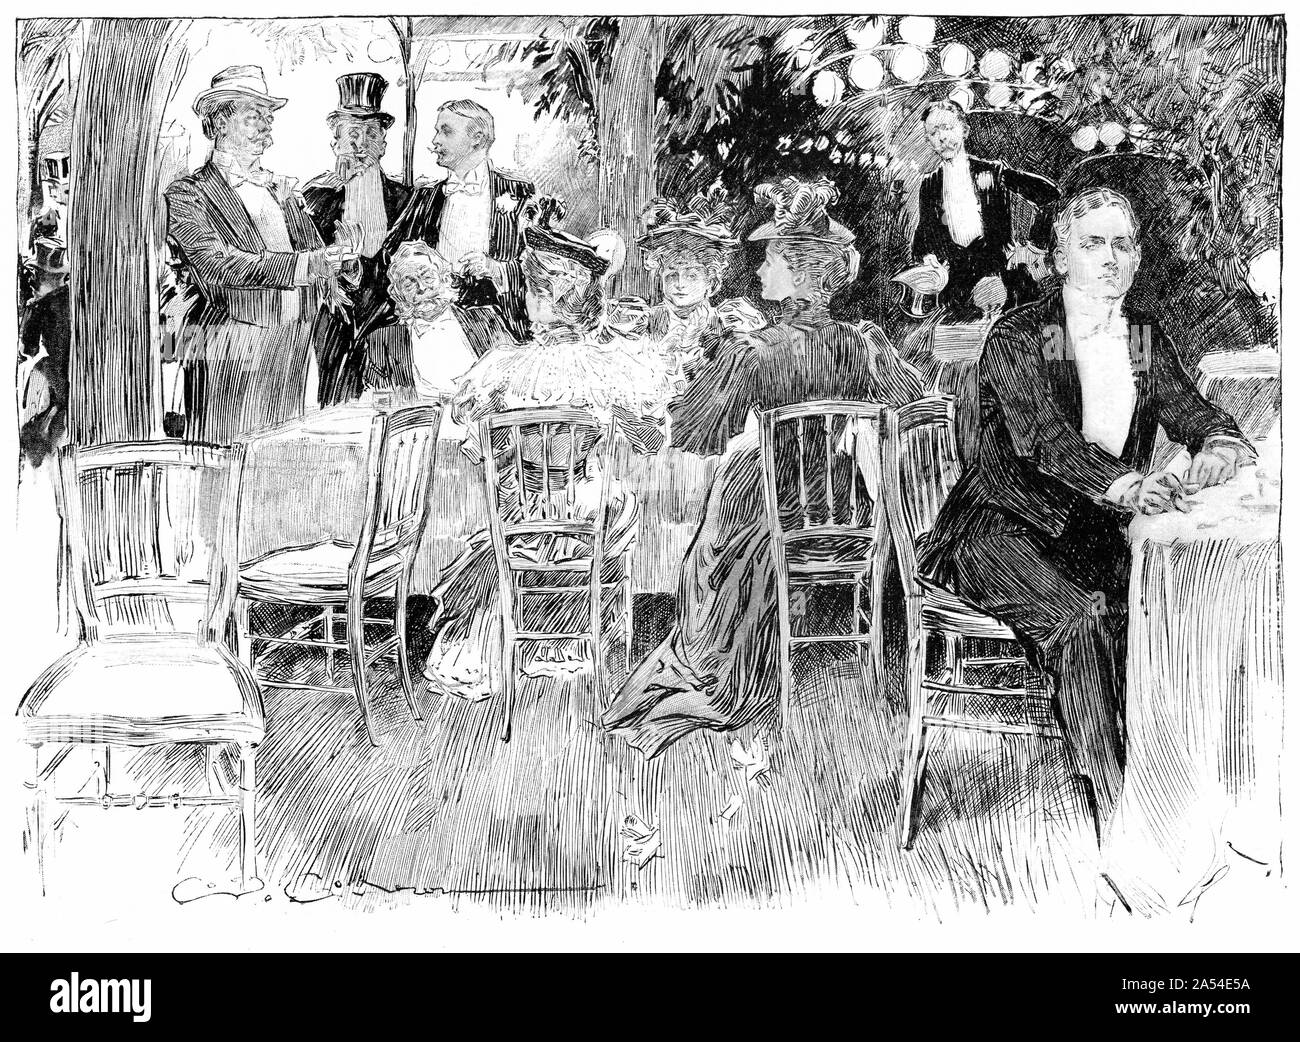 Halftone of patrons enjoying their time at an outdoor cafe. From Harper's magazine 1895 Stock Photo